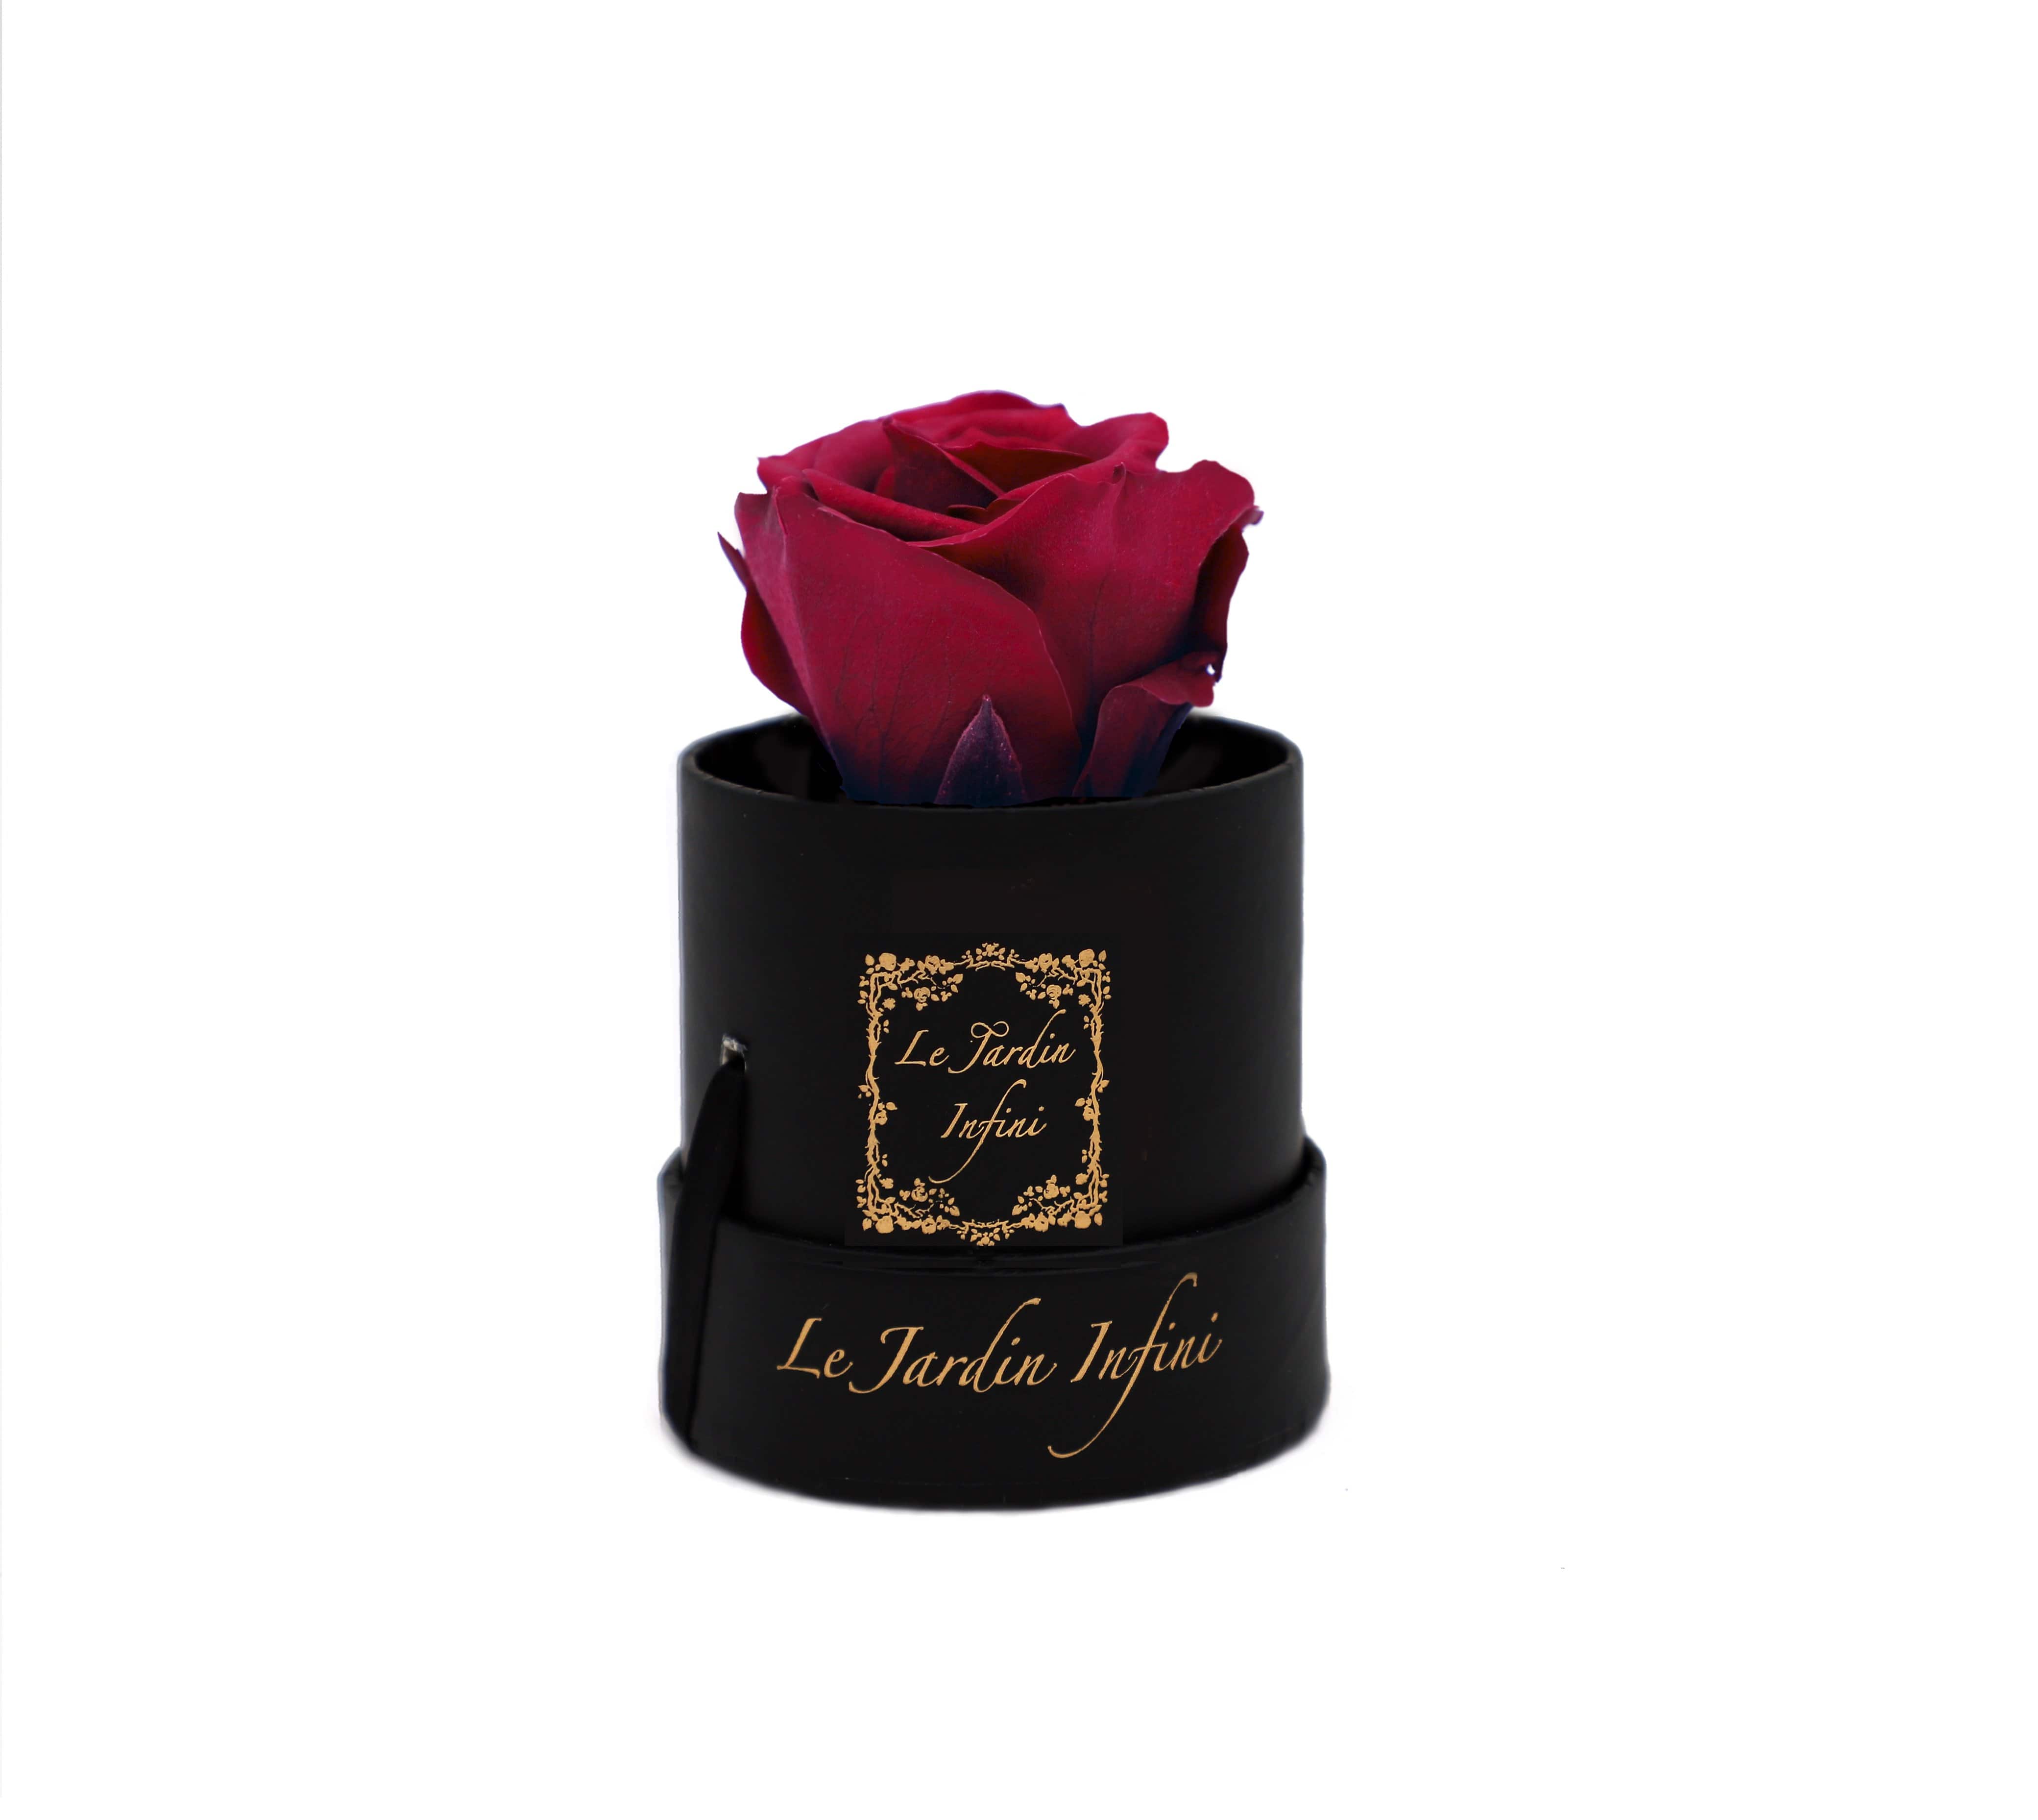 Single Burgundy Preserved Rose - Small Round Black Box - Le Jardin Infini Roses in a Box